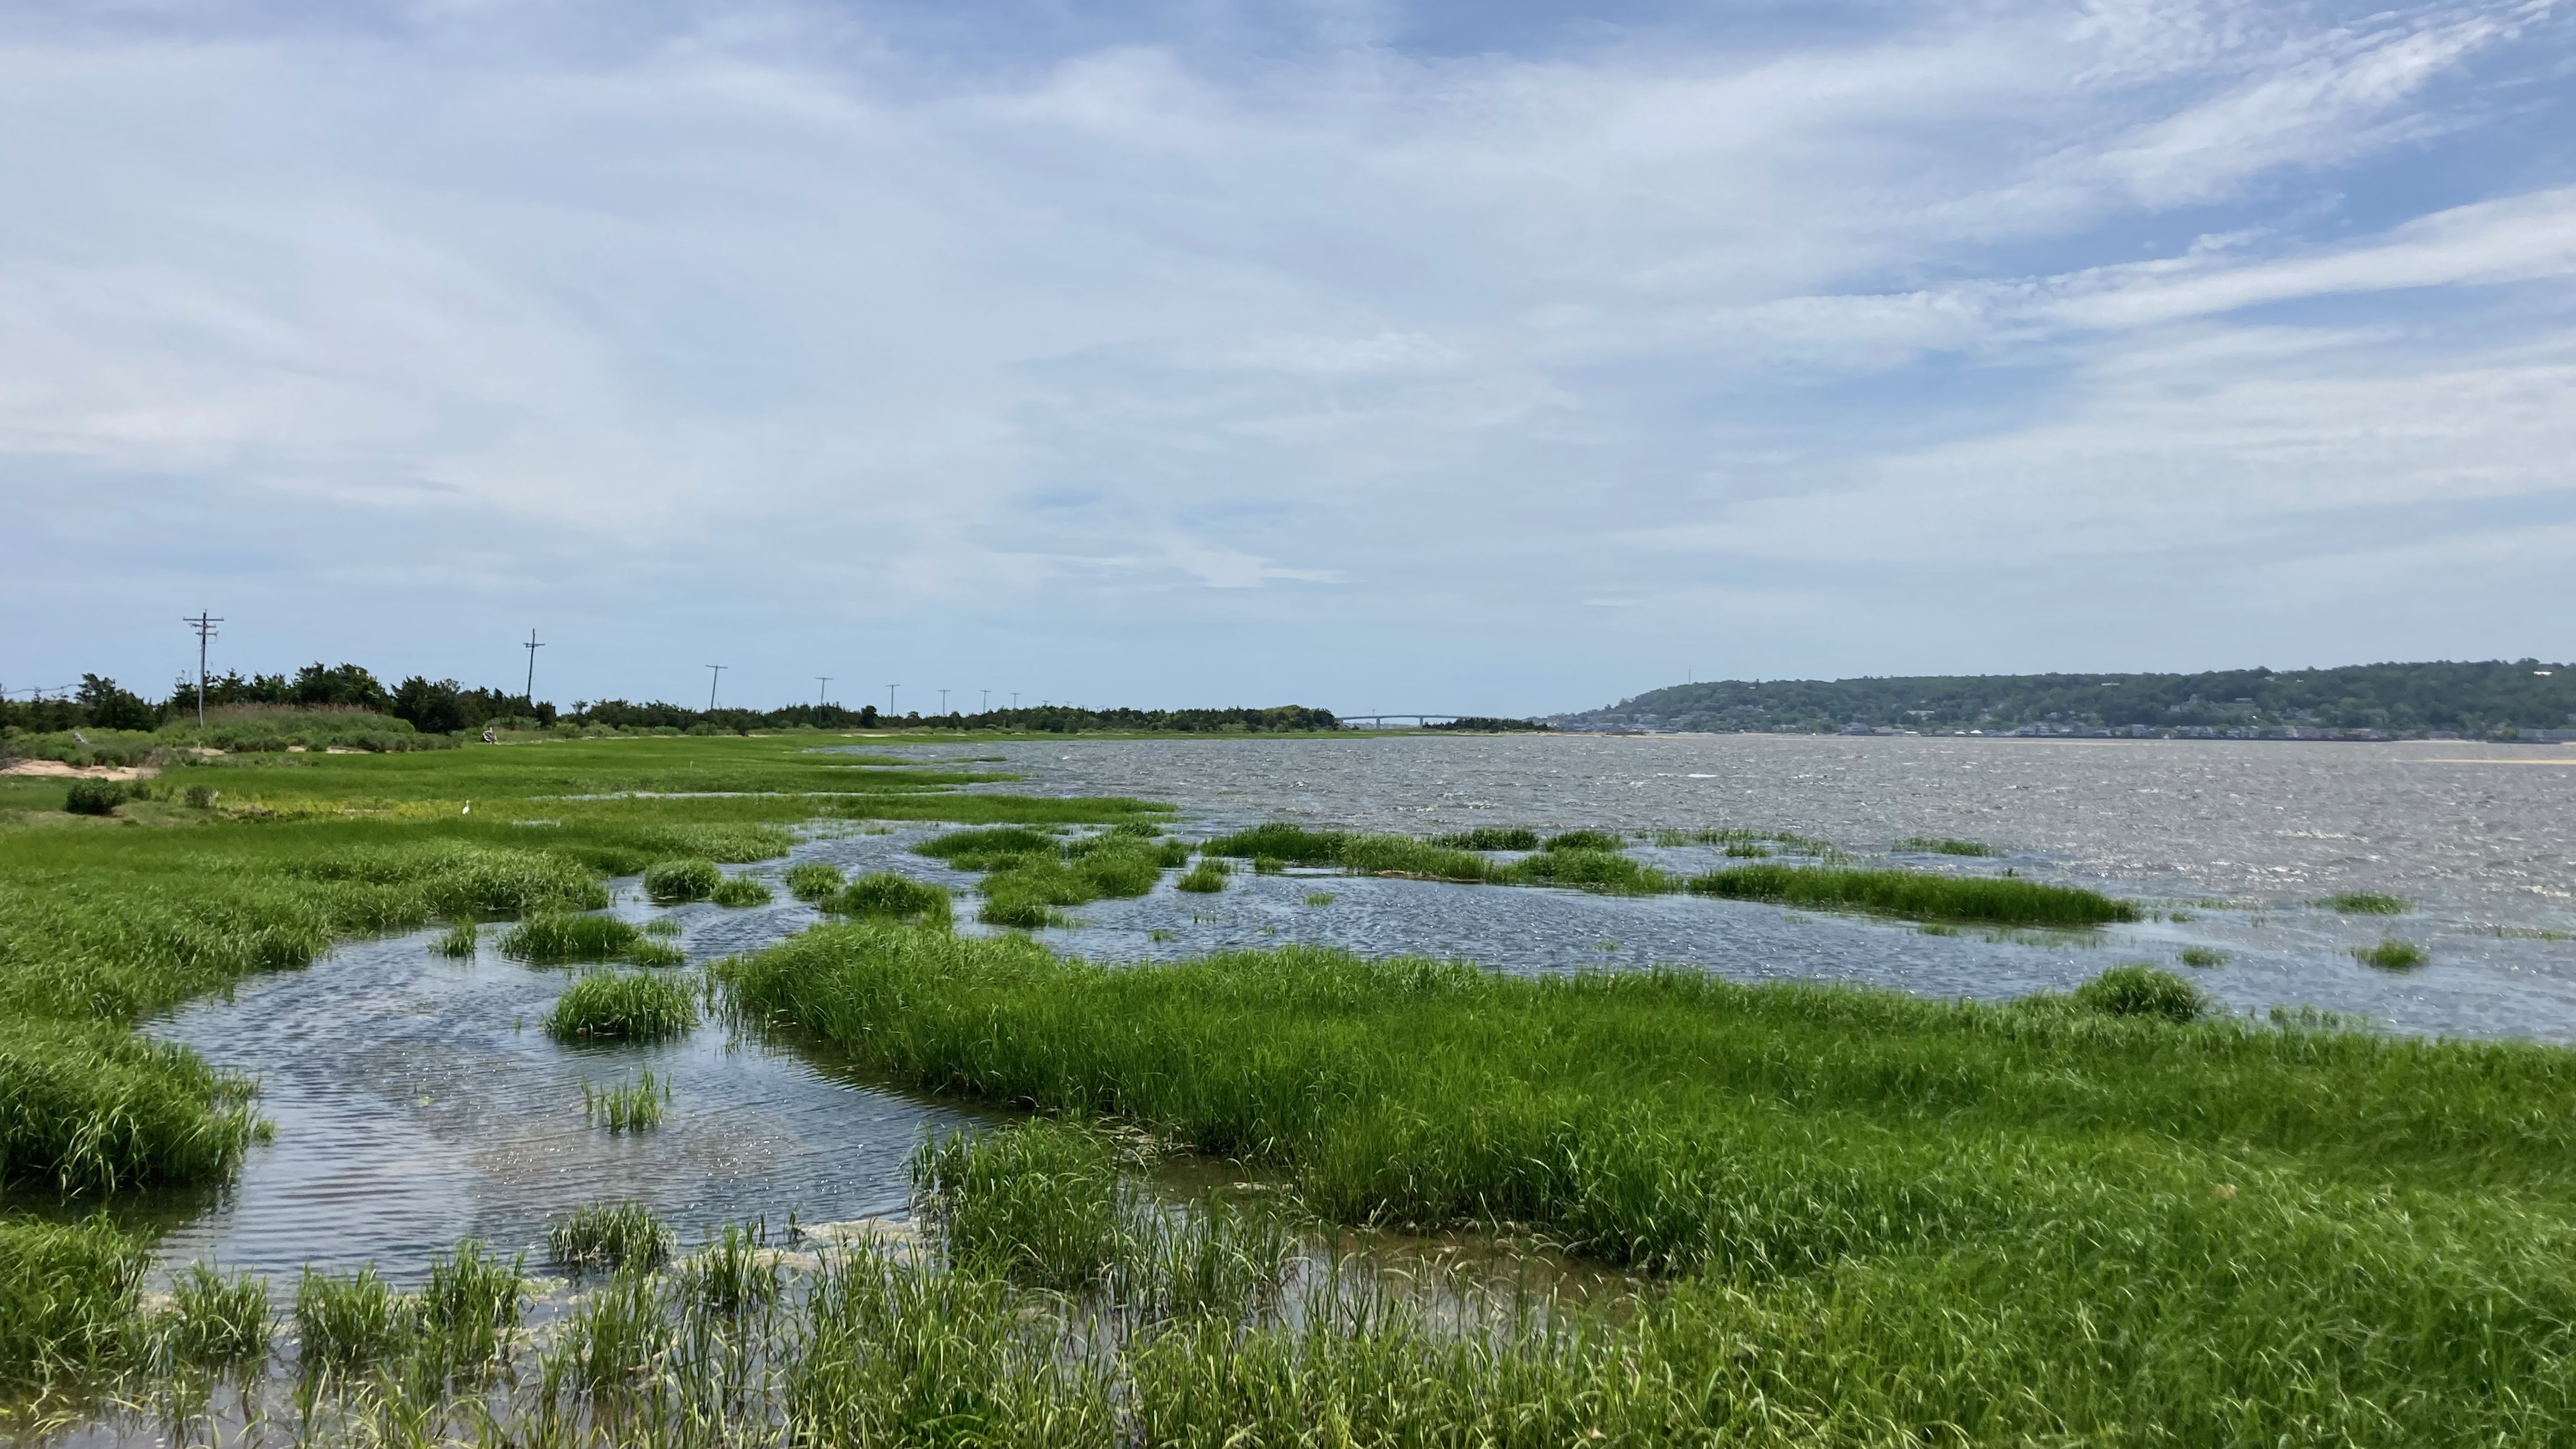 View of Sandy Hook Bay at Gateway National Recreation Area.